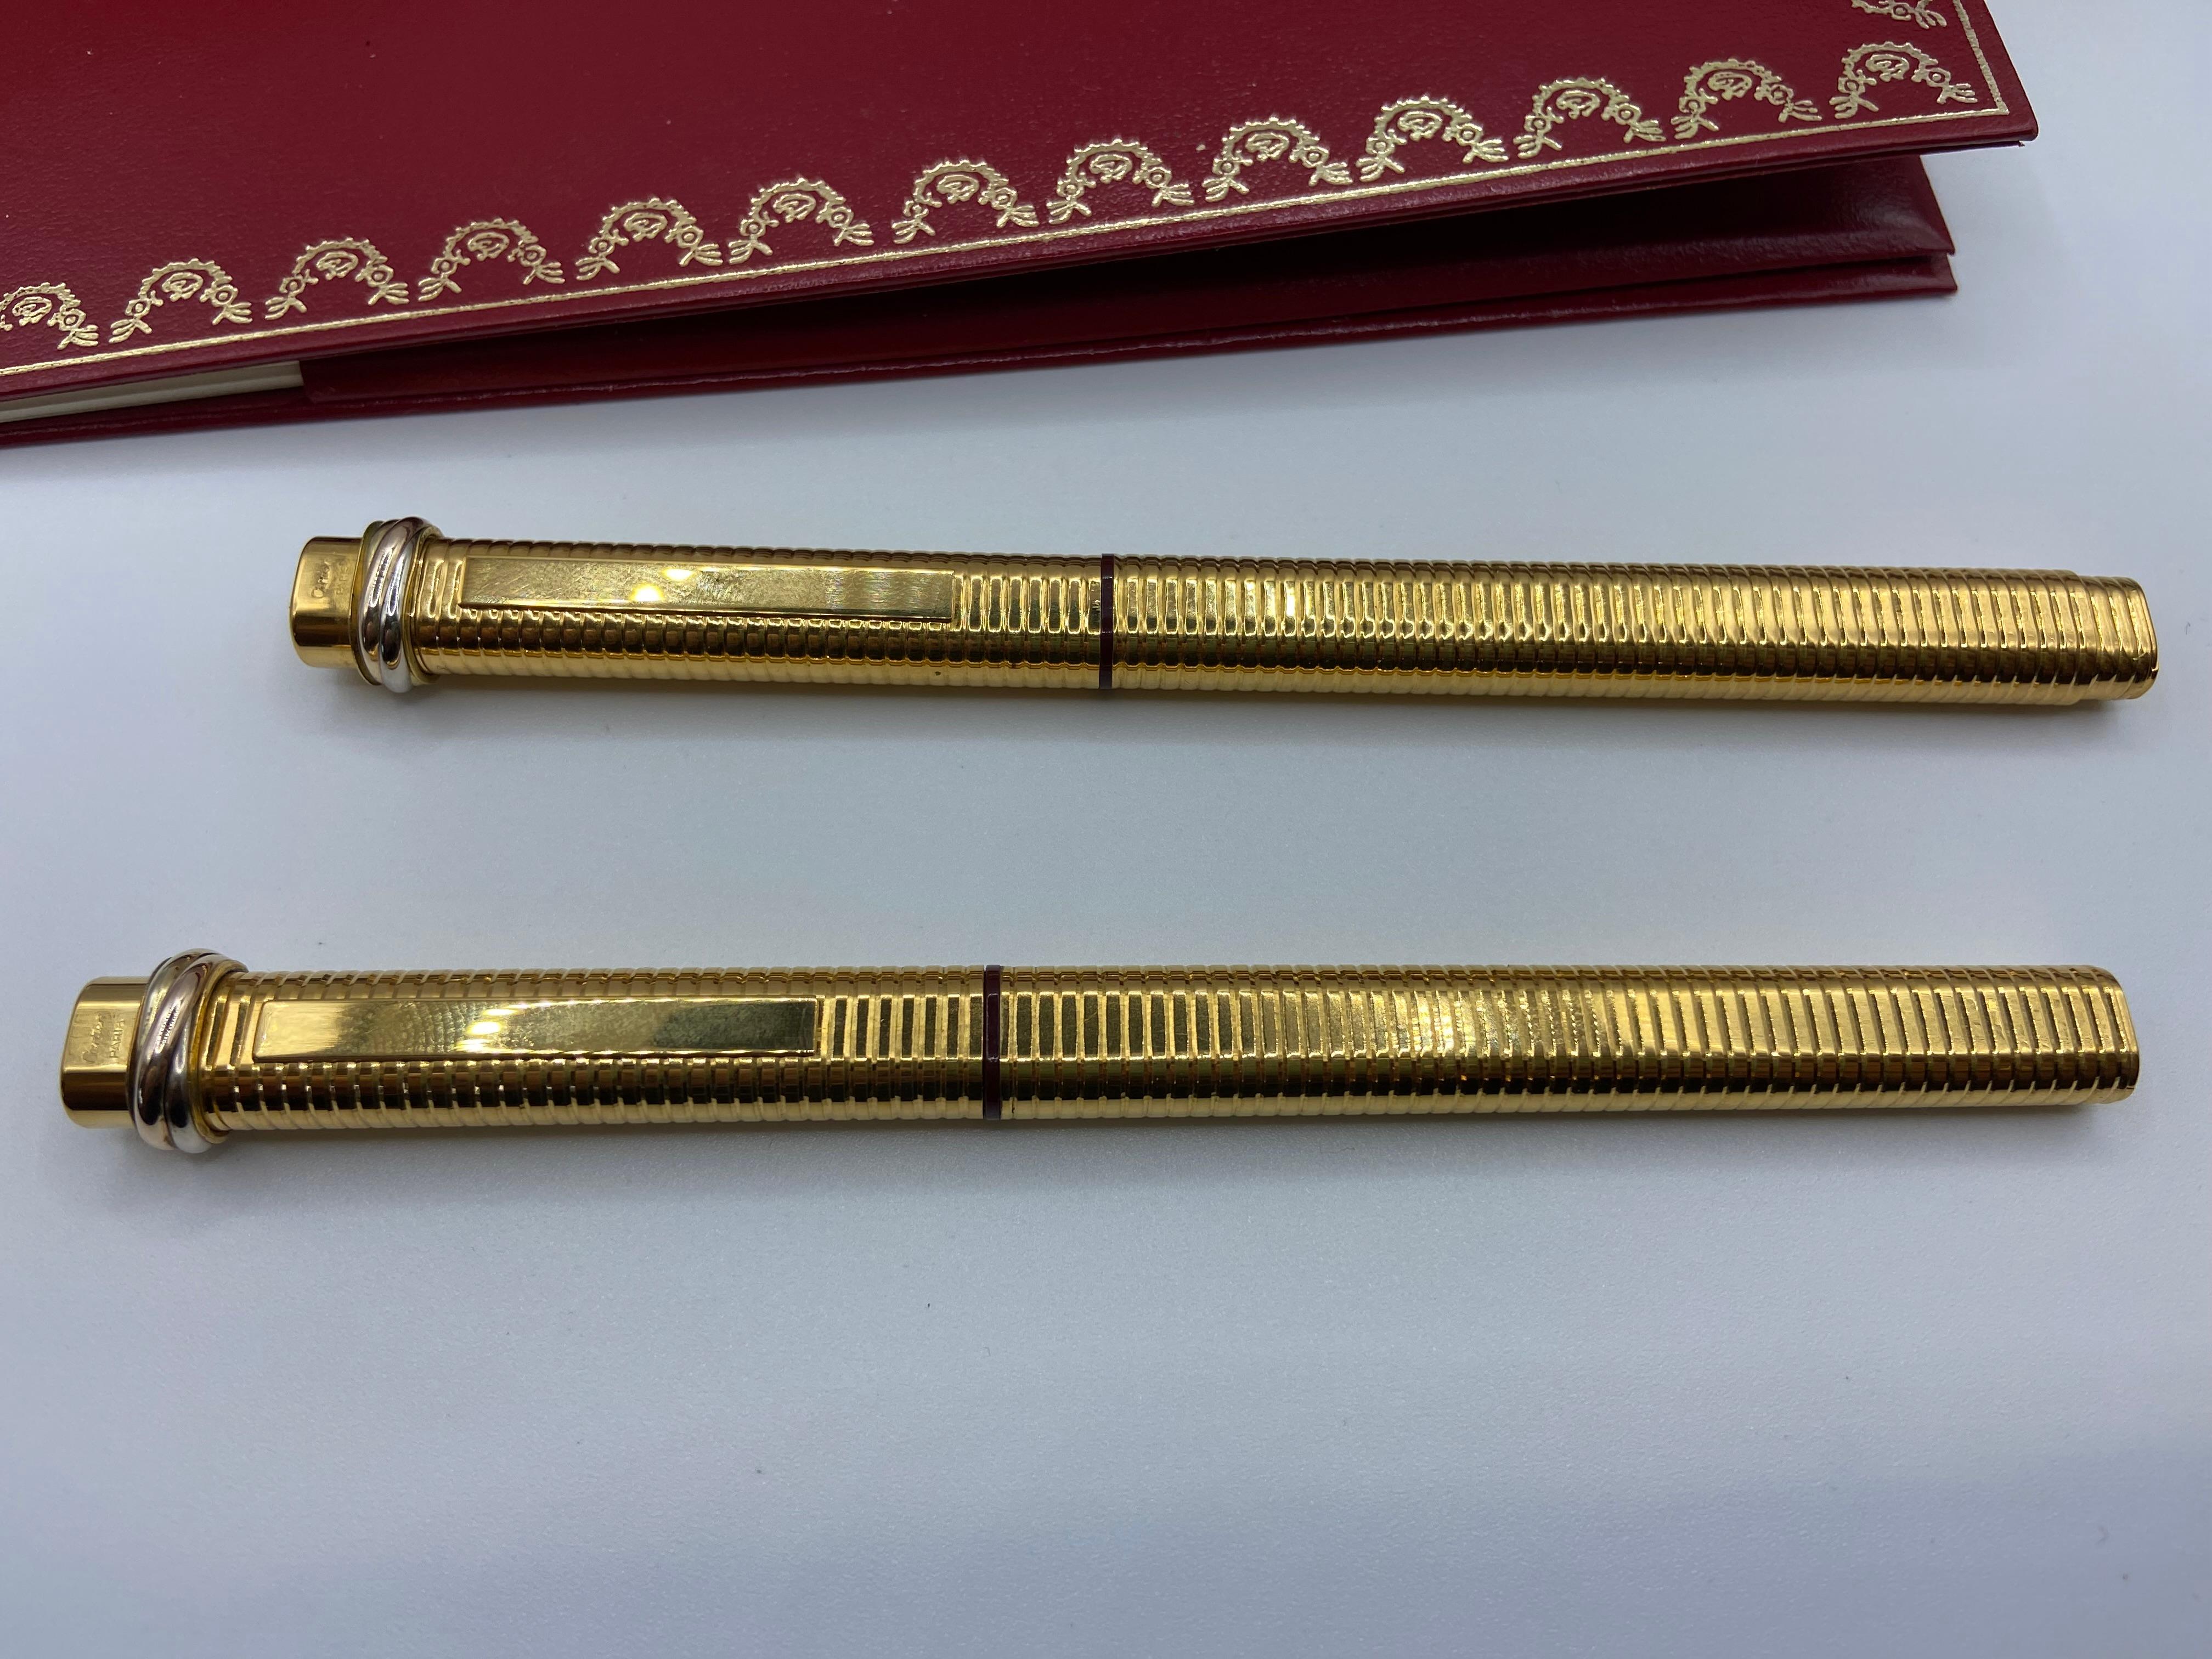 Two Pens, a Fountain Pen and a Roller, Santos by Must de Cartier, 18 Kt Gold Plated 6